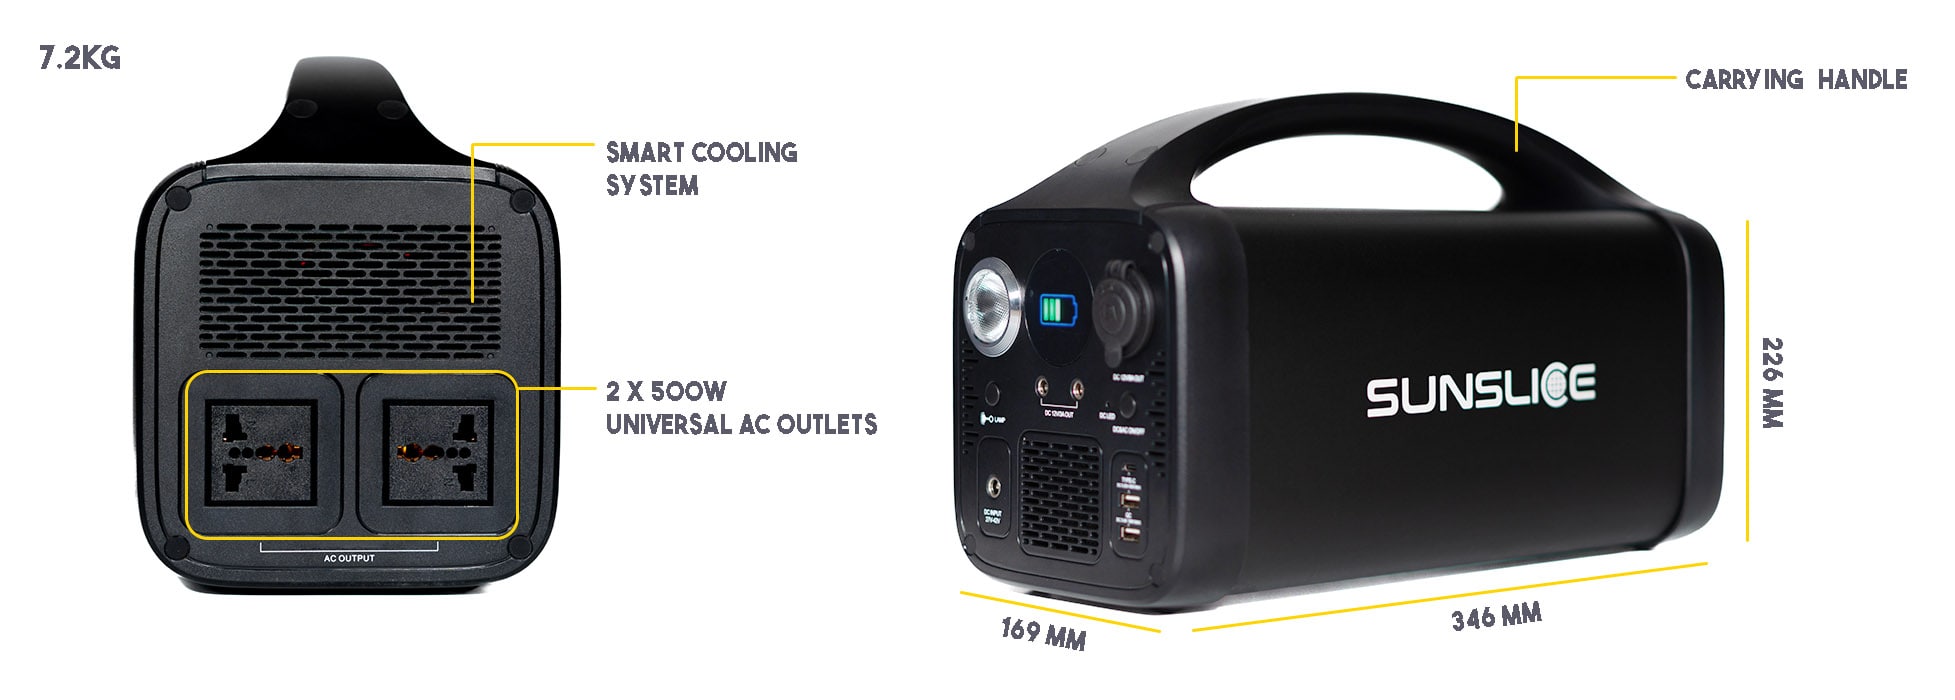 Solar generator Gravity 486 with a smart cooling system, 2x 500W universal AC outlets. Size: 346mm, 226mm, 169mm